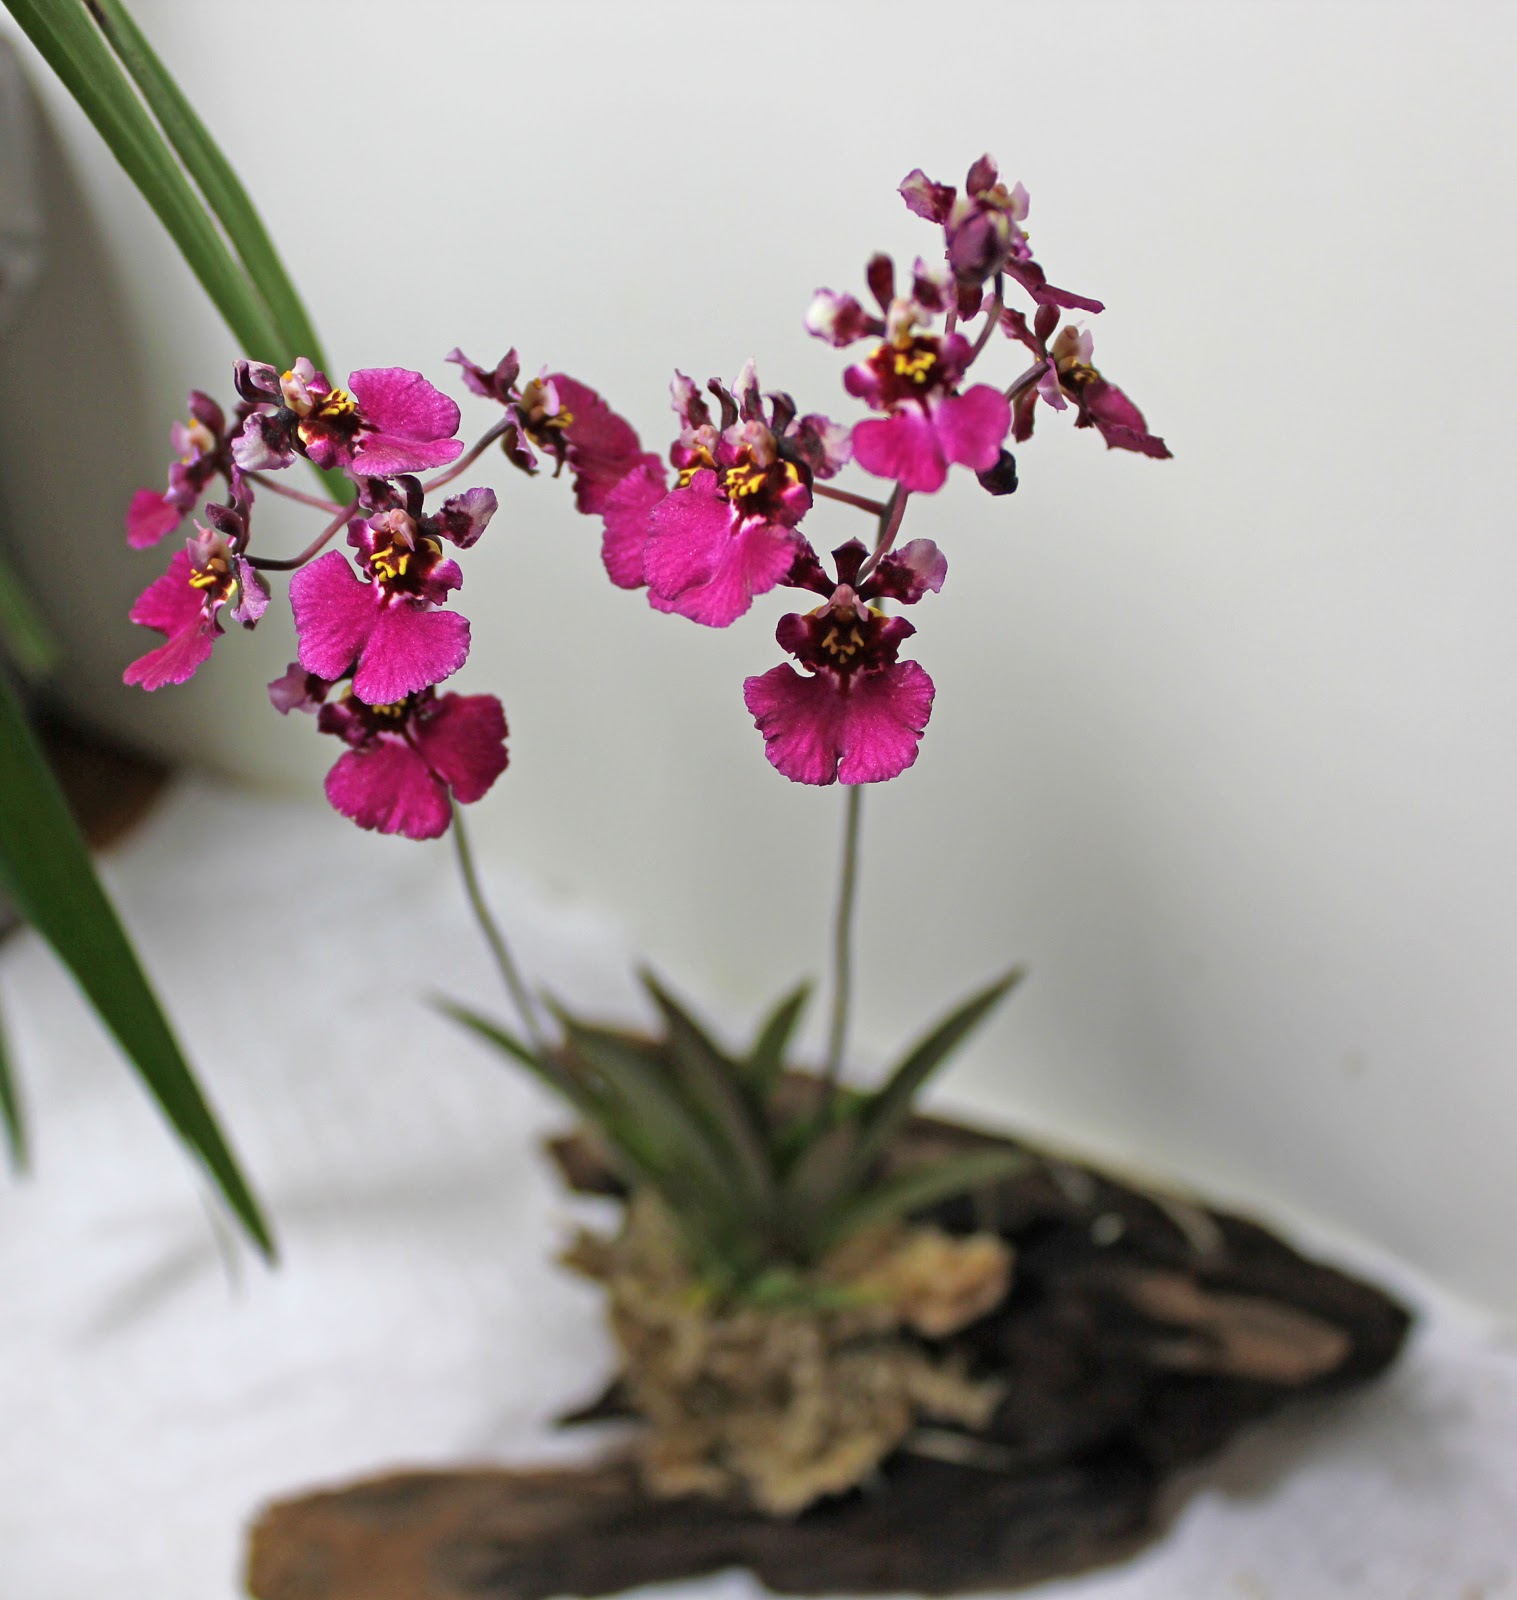 Maria's Orchids: I Don't Like Sphagnum Moss